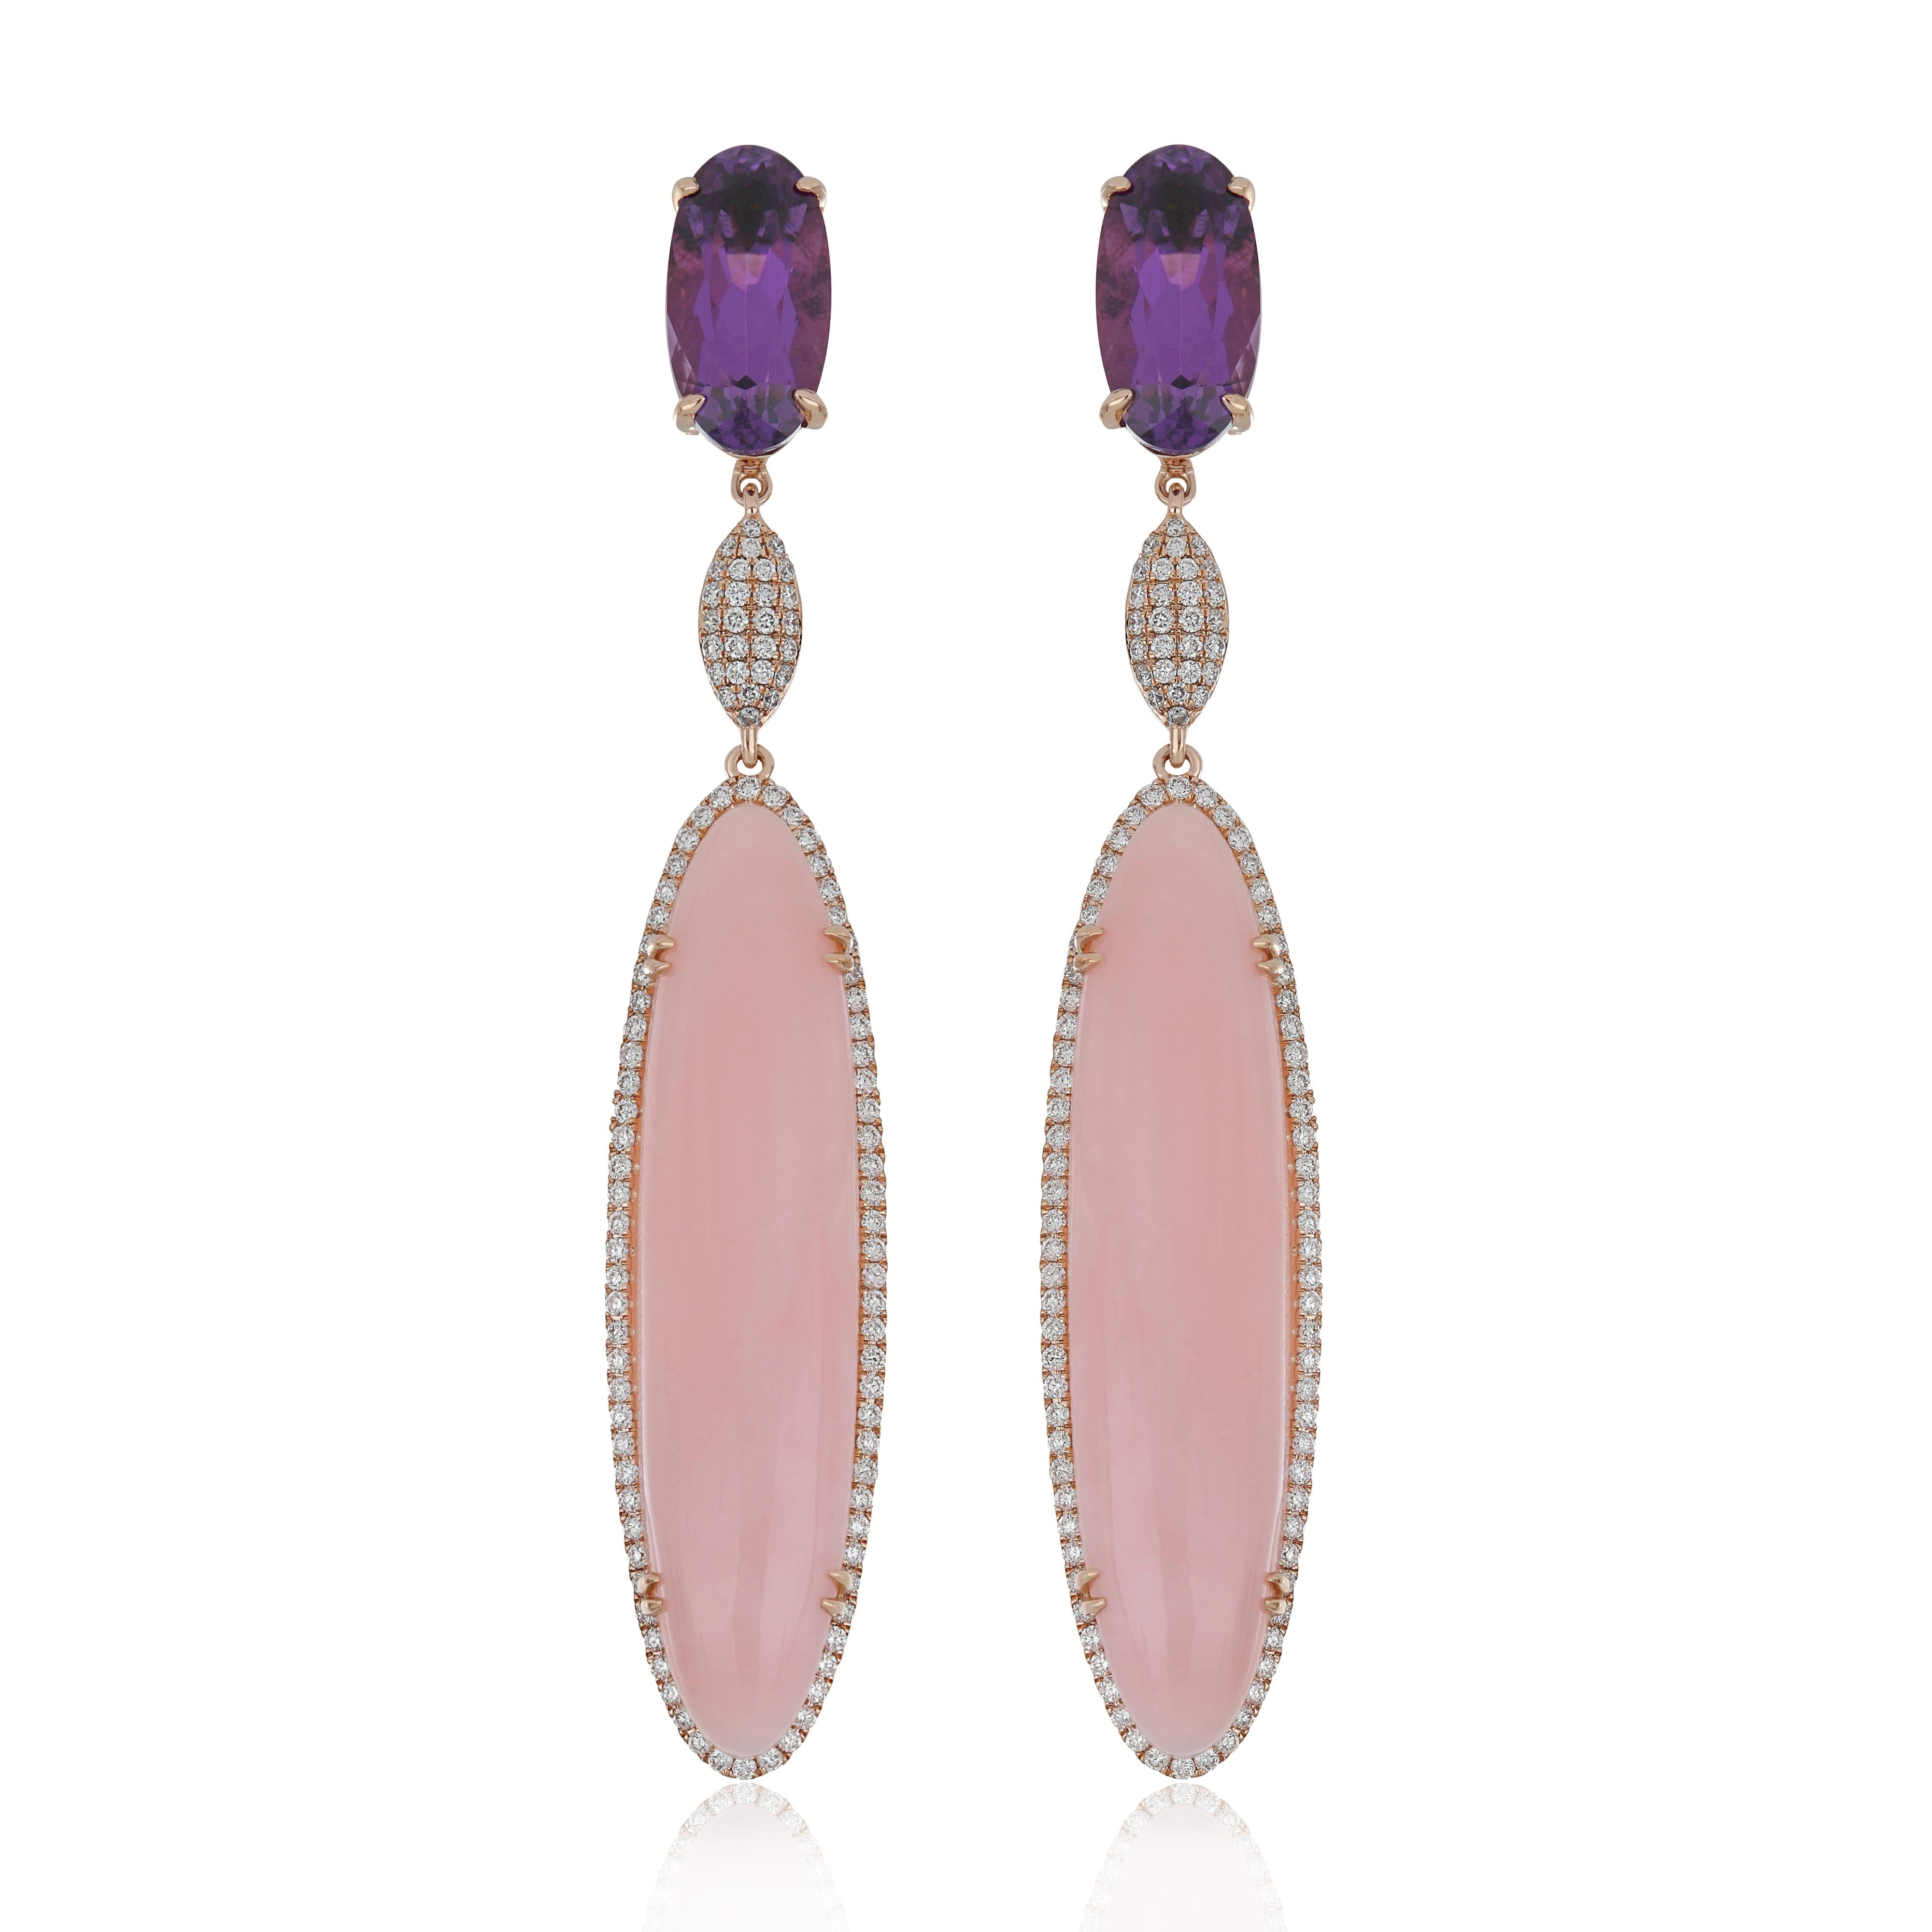 Elegant and exquisitely detailed 14 Karat Rose Gold Pair of Earrings, center set with 13.95 Cts .Oval Shape Pink Opal, and 4.45 Cts of Oval Cut Amethyst accented with  micro pave set Diamonds, weighing approx. 0.69 Cts Beautifully Hand crafted in 14